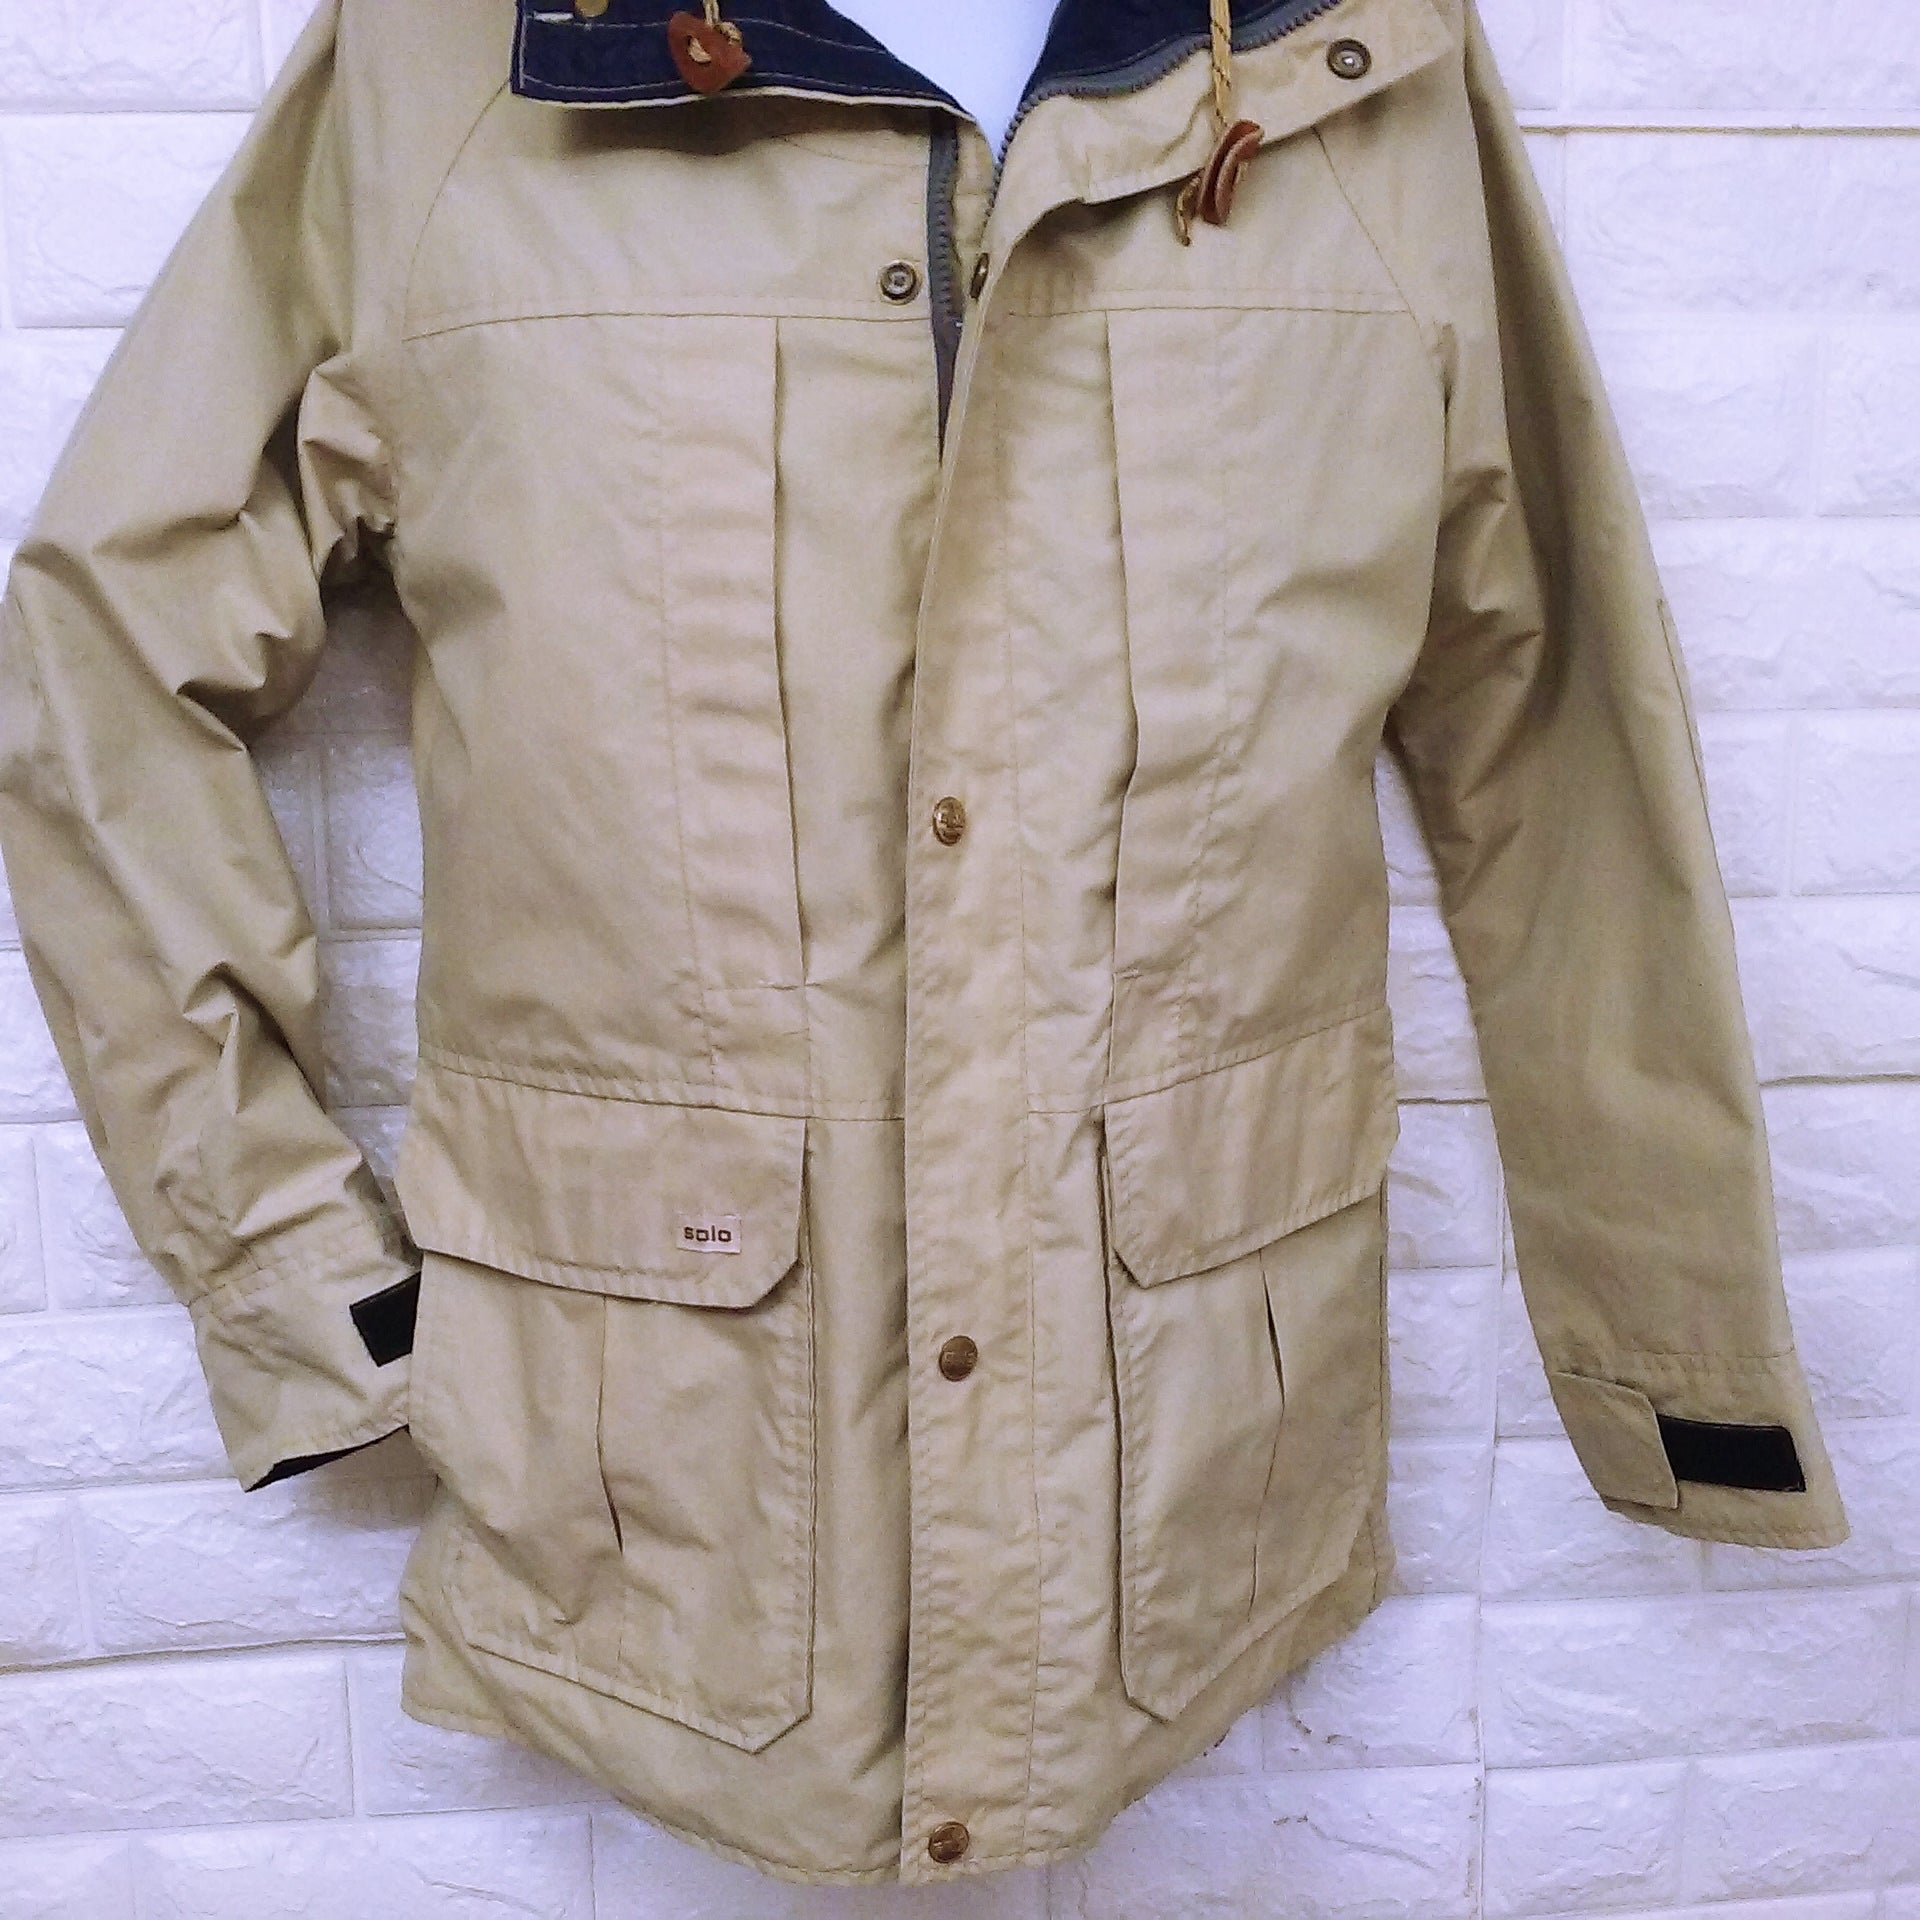 Vintage 70s/80s Active Outdoor Chore Coat Utility Cargo Jacket by